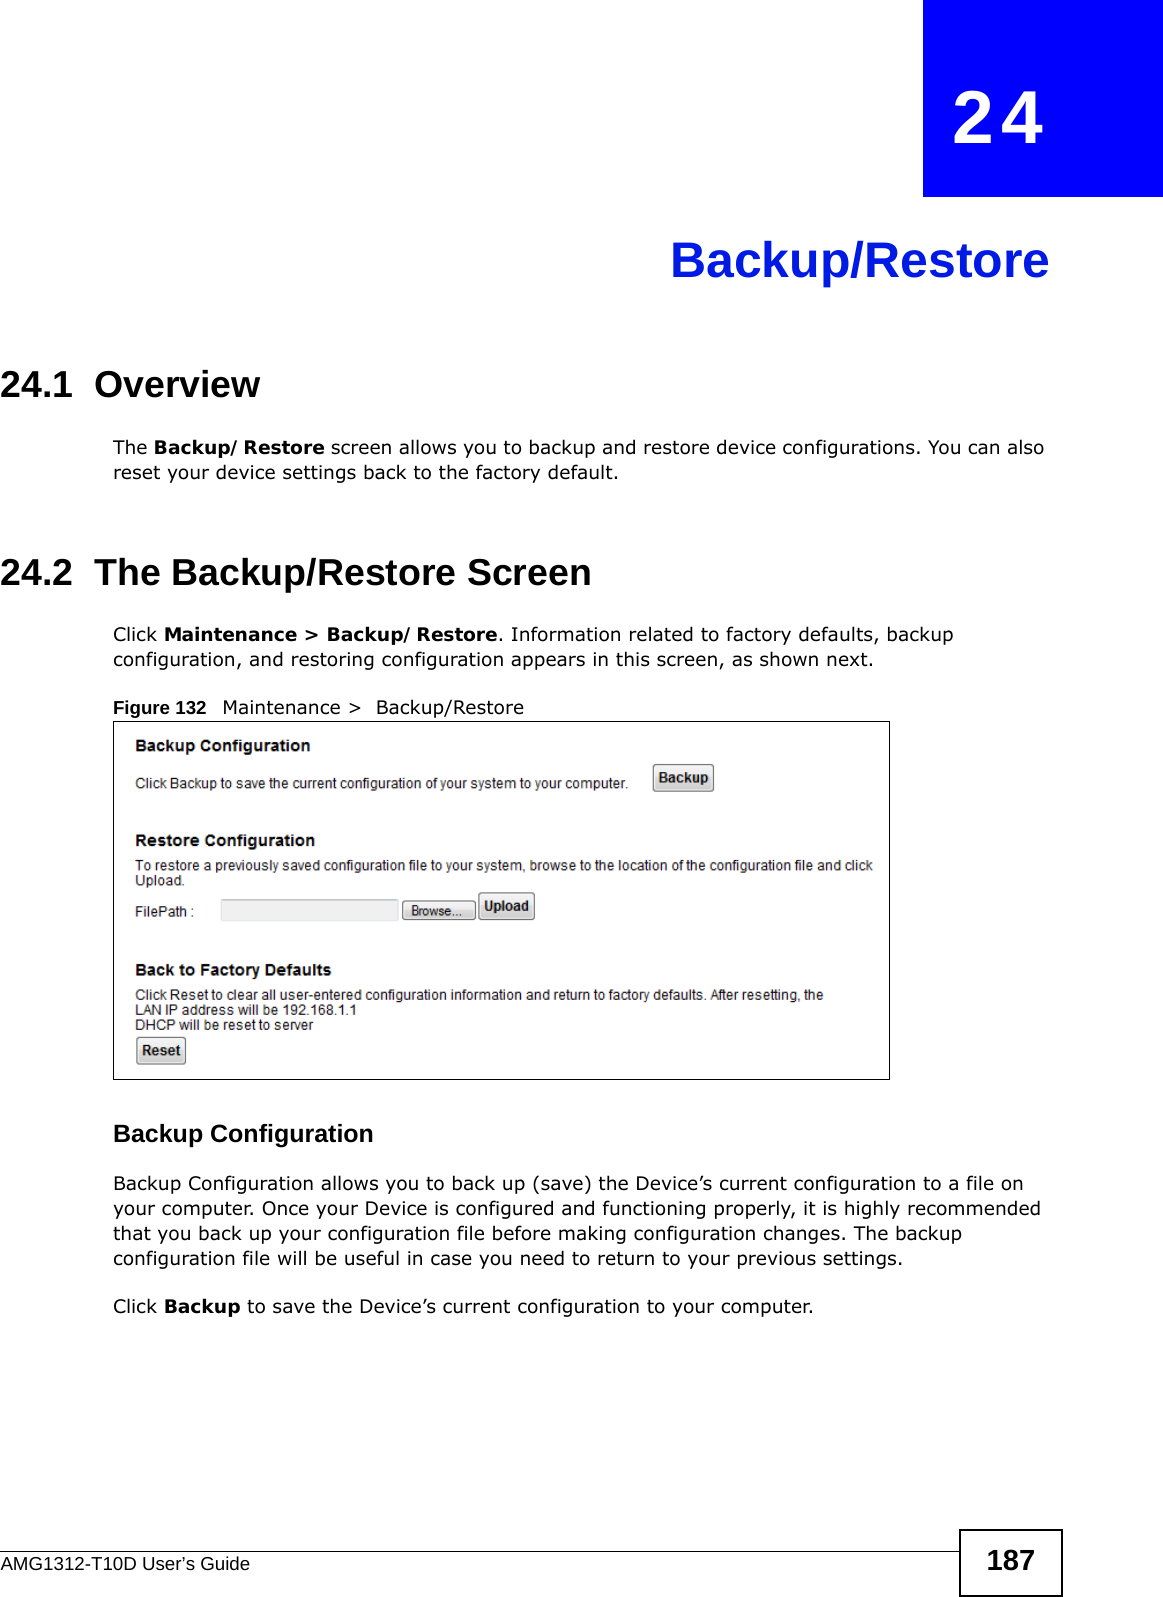 AMG1312-T10D User’s Guide 187CHAPTER   24Backup/Restore24.1  OverviewThe Backup/Restore screen allows you to backup and restore device configurations. You can also reset your device settings back to the factory default.24.2  The Backup/Restore Screen Click Maintenance &gt; Backup/Restore. Information related to factory defaults, backup configuration, and restoring configuration appears in this screen, as shown next.Figure 132   Maintenance &gt;  Backup/RestoreBackup Configuration Backup Configuration allows you to back up (save) the Device’s current configuration to a file on your computer. Once your Device is configured and functioning properly, it is highly recommended that you back up your configuration file before making configuration changes. The backup configuration file will be useful in case you need to return to your previous settings. Click Backup to save the Device’s current configuration to your computer.